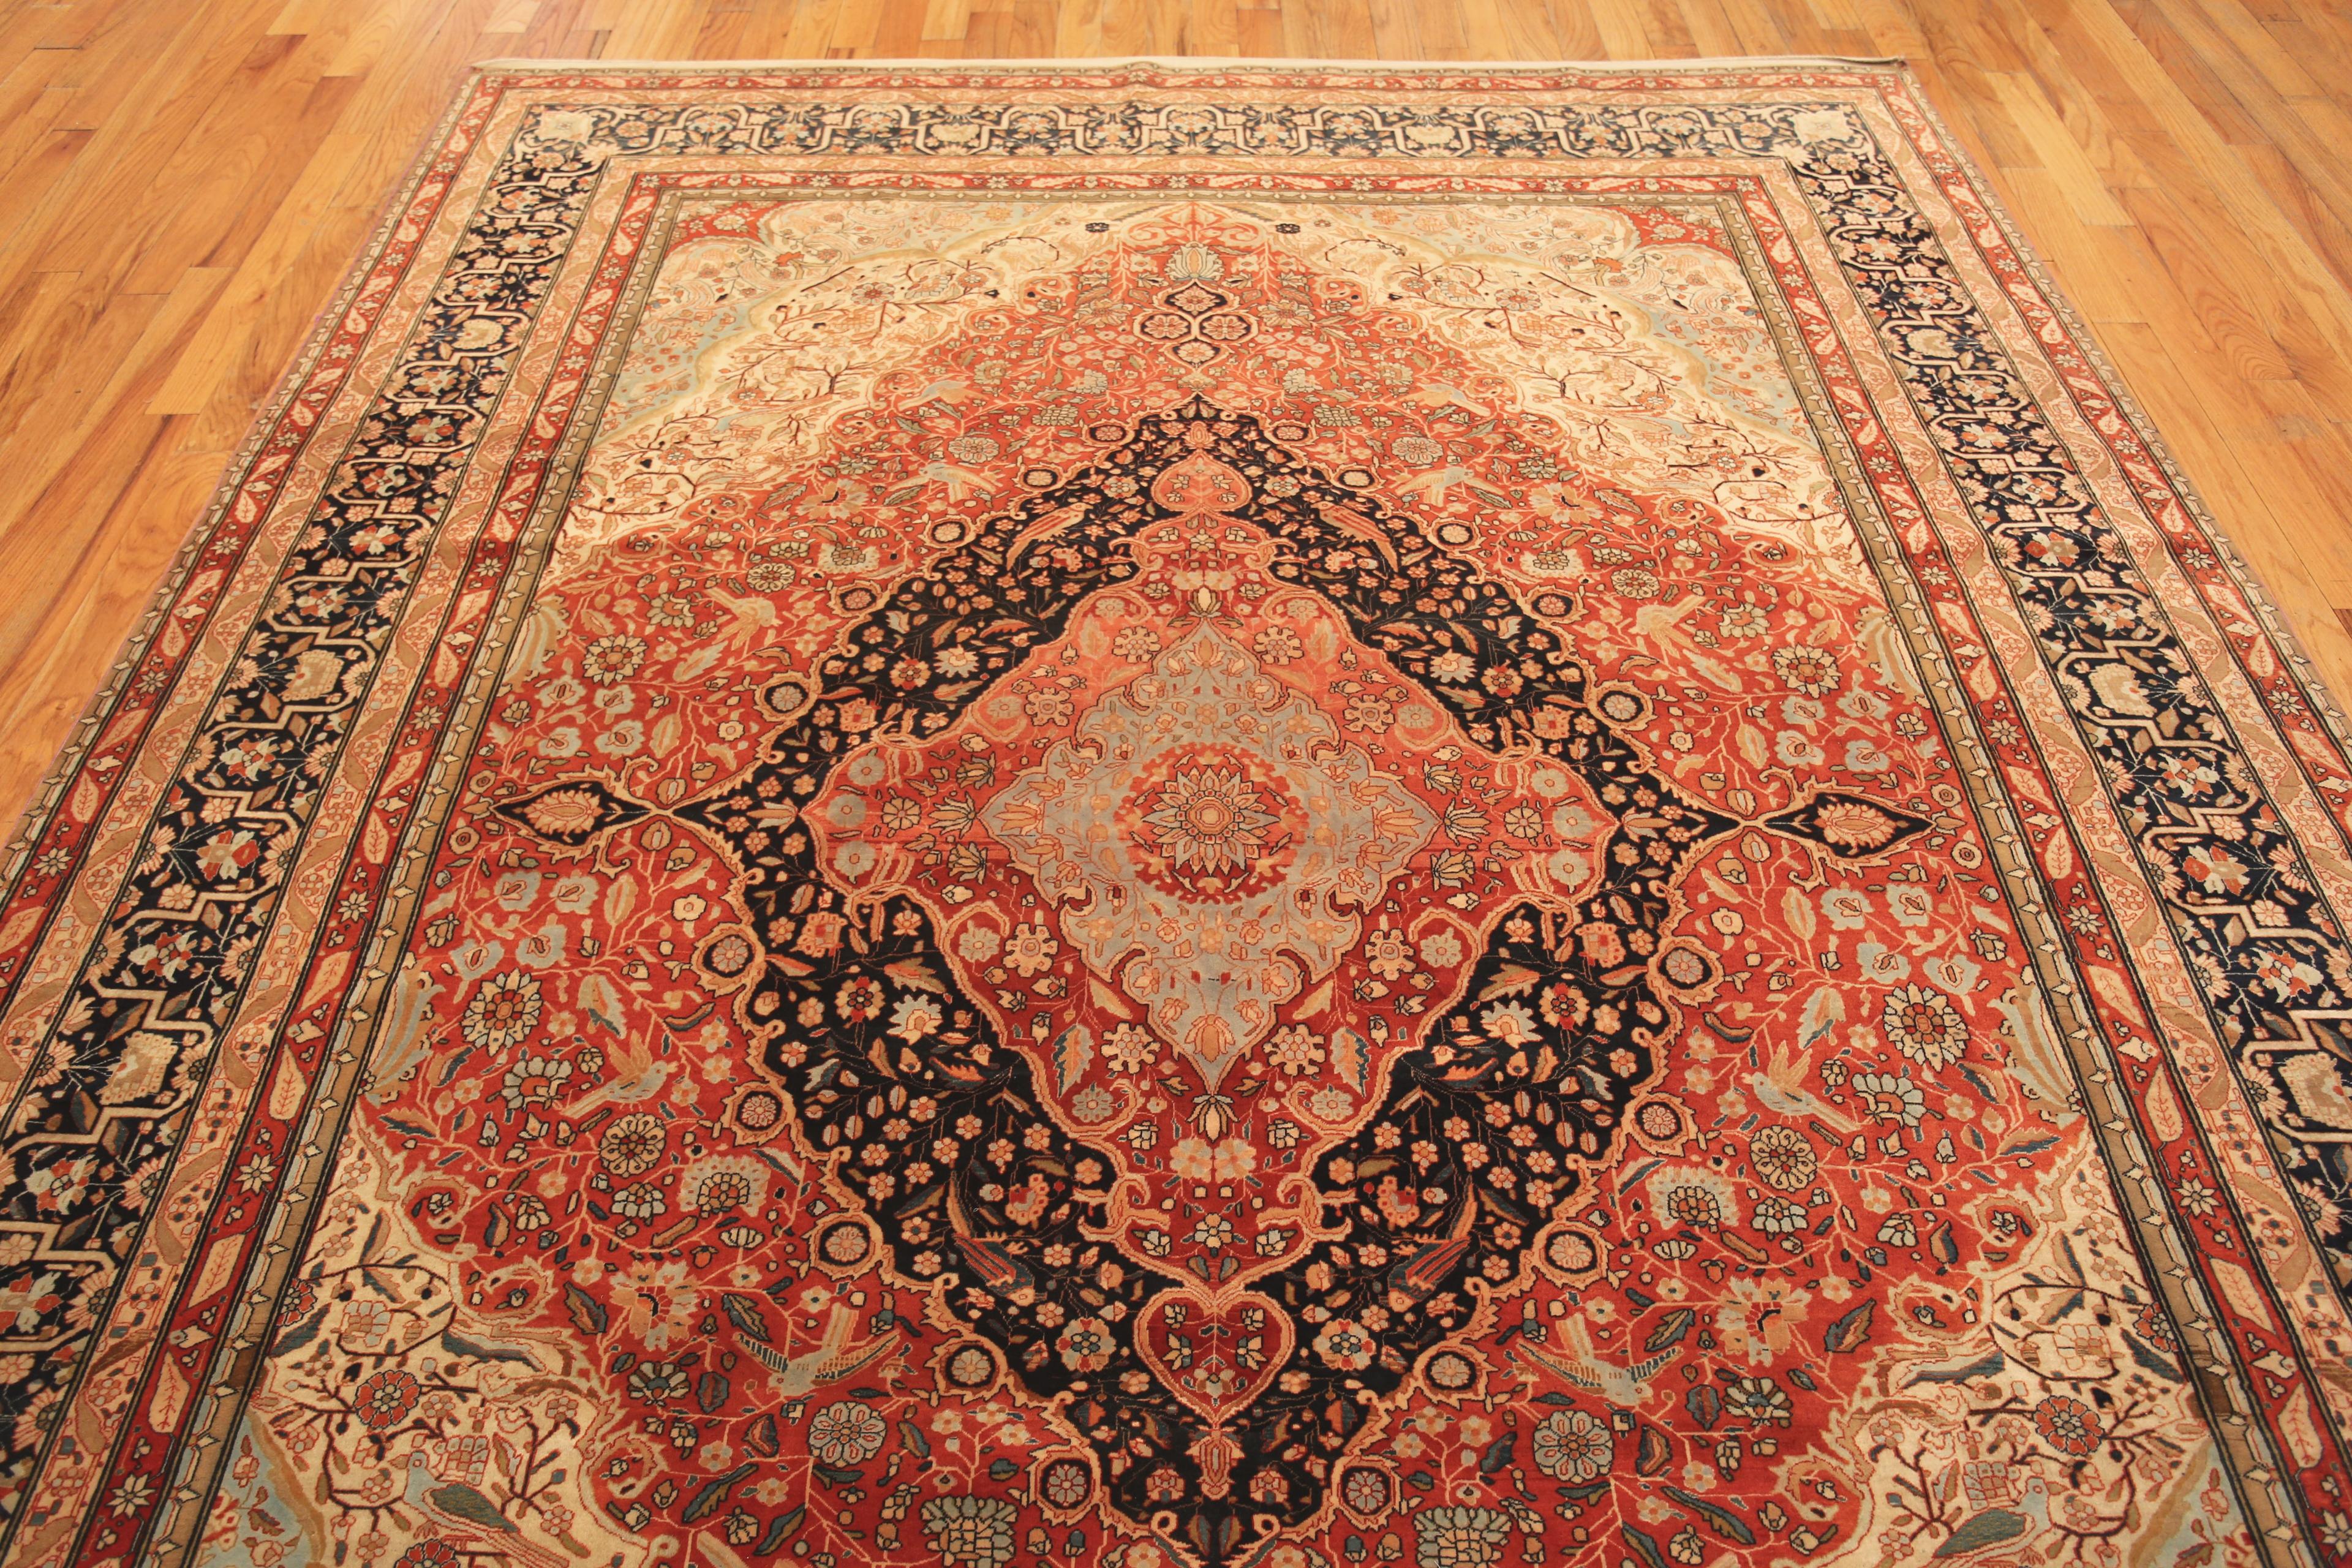 Rare Luxurious Fine Antique Persian Mohtasham Kashan Area Rug, Country of Origin: Persia, Circa date: 1880. Size: 8 ft 9 in x 11 ft 2 in (2.67 m x 3.4 m)
 